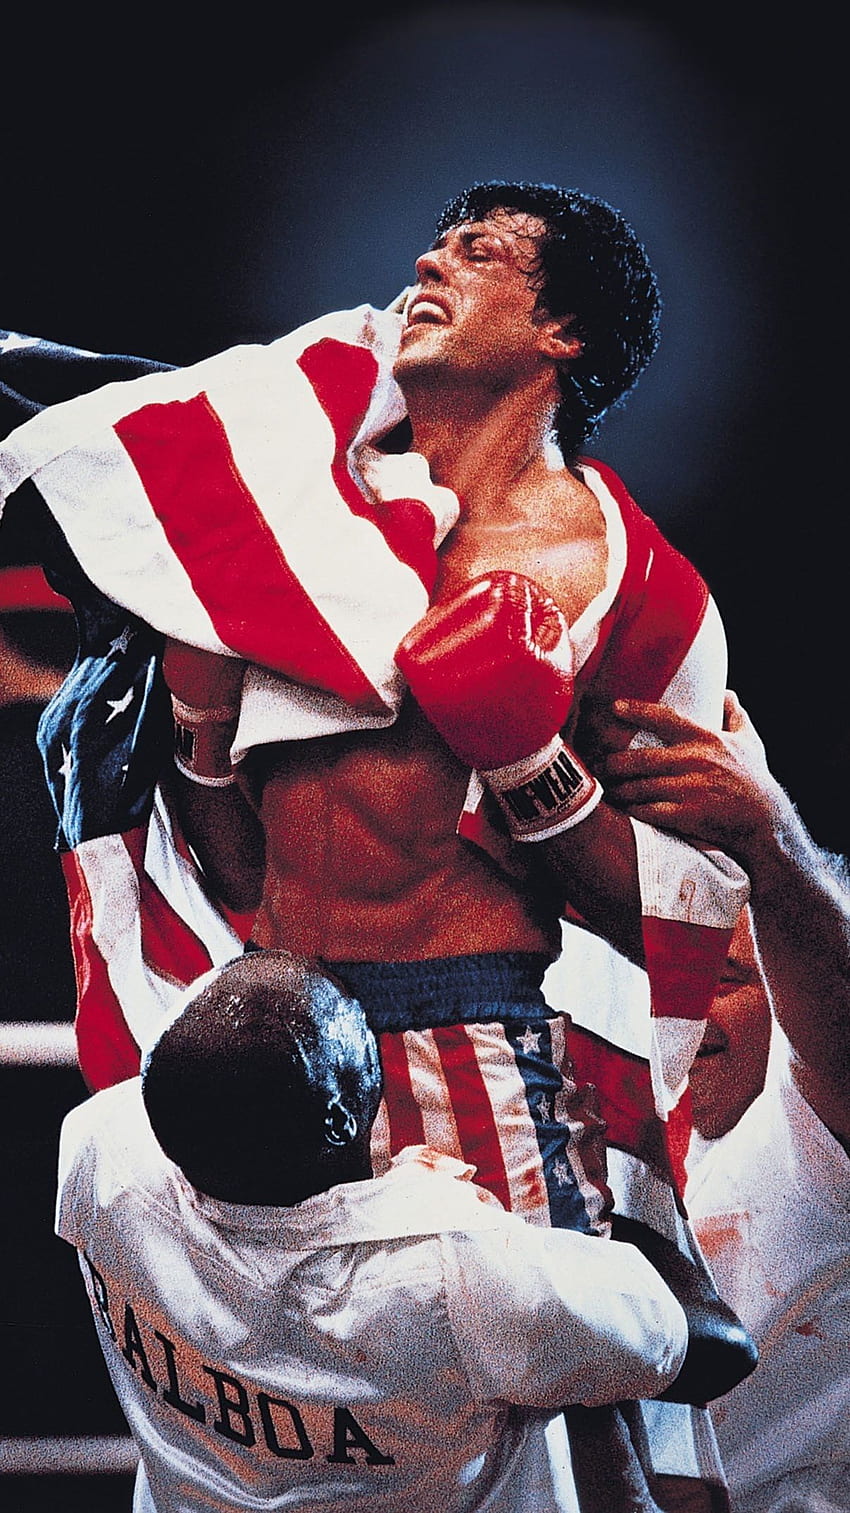 Apollo Creed Wallpapers  Wallpaper Cave